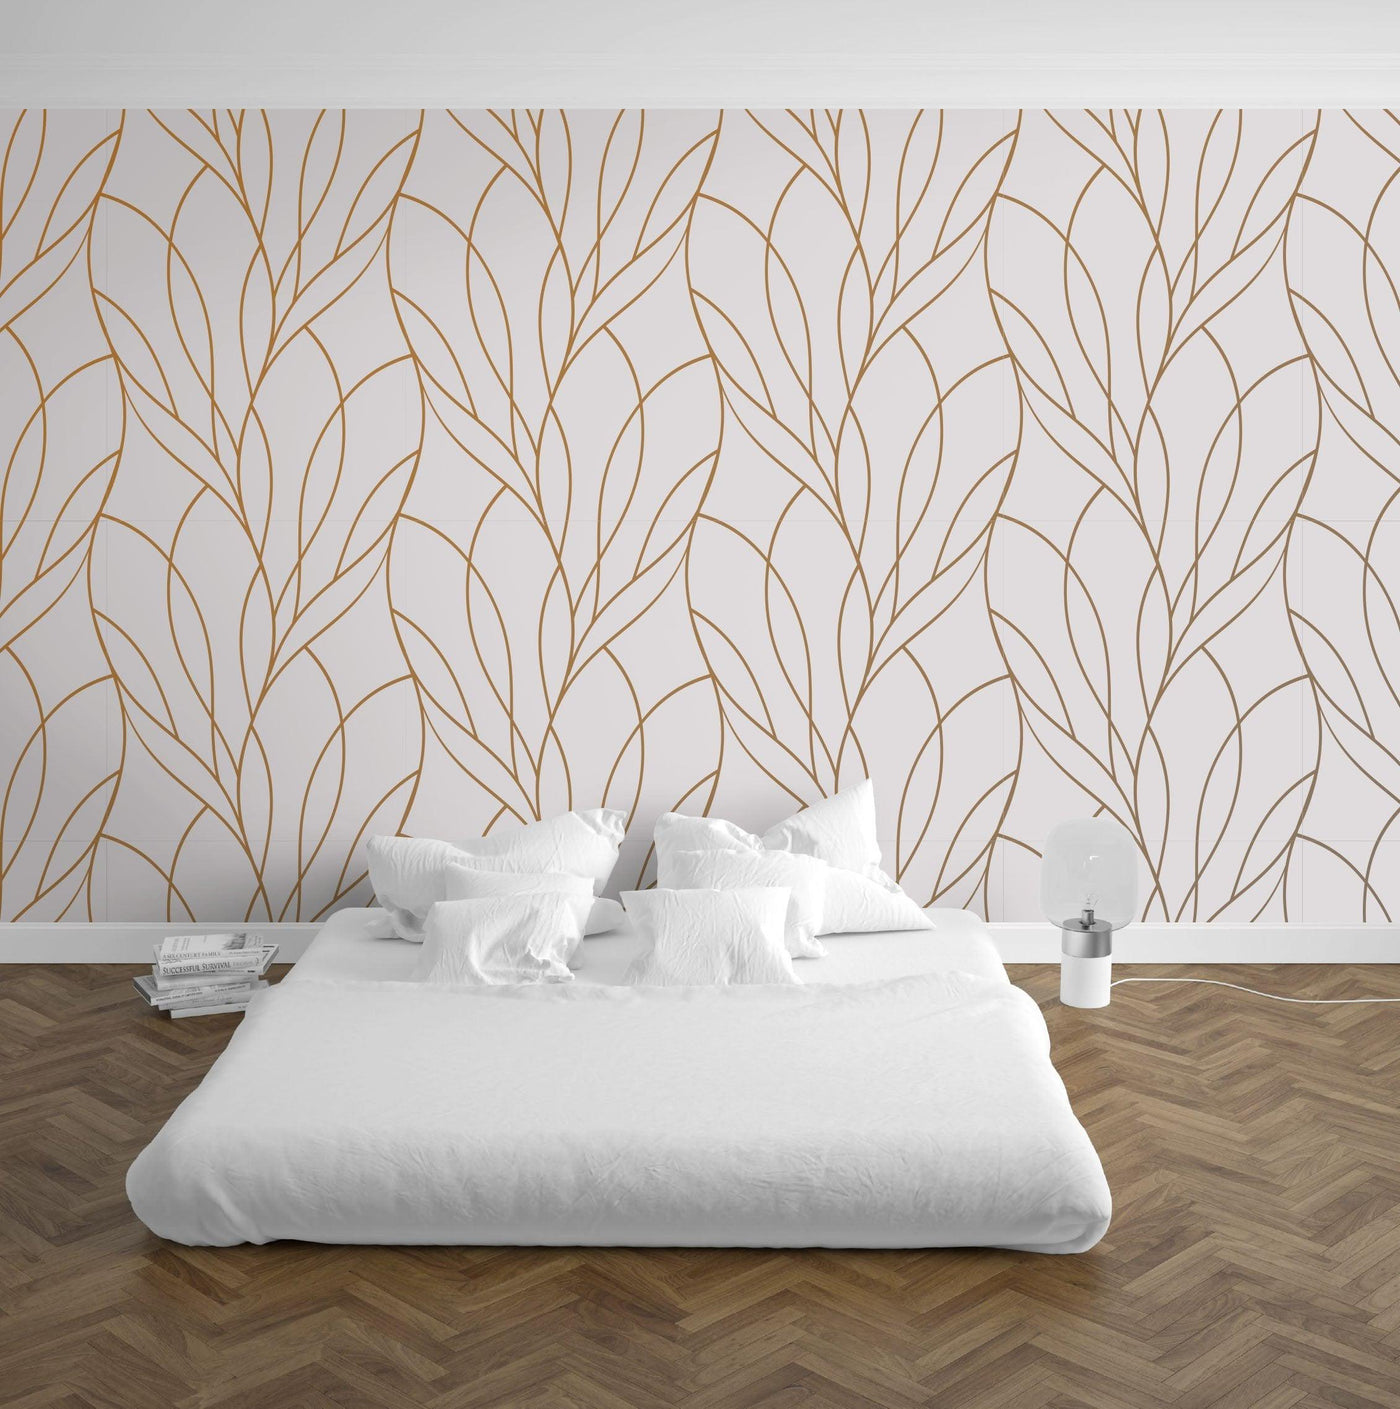 Gold Leaf Abstraction Mural Wallpaper (m²)-Wall Decor-ABSTRACT WALLPAPERS, DESIGN WALLPAPERS, MURALS, MURALS / WALLPAPERS, NATURE WALL ART, NON-WOVEN WALLPAPER-Forest Homes-Nature inspired decor-Nature decor